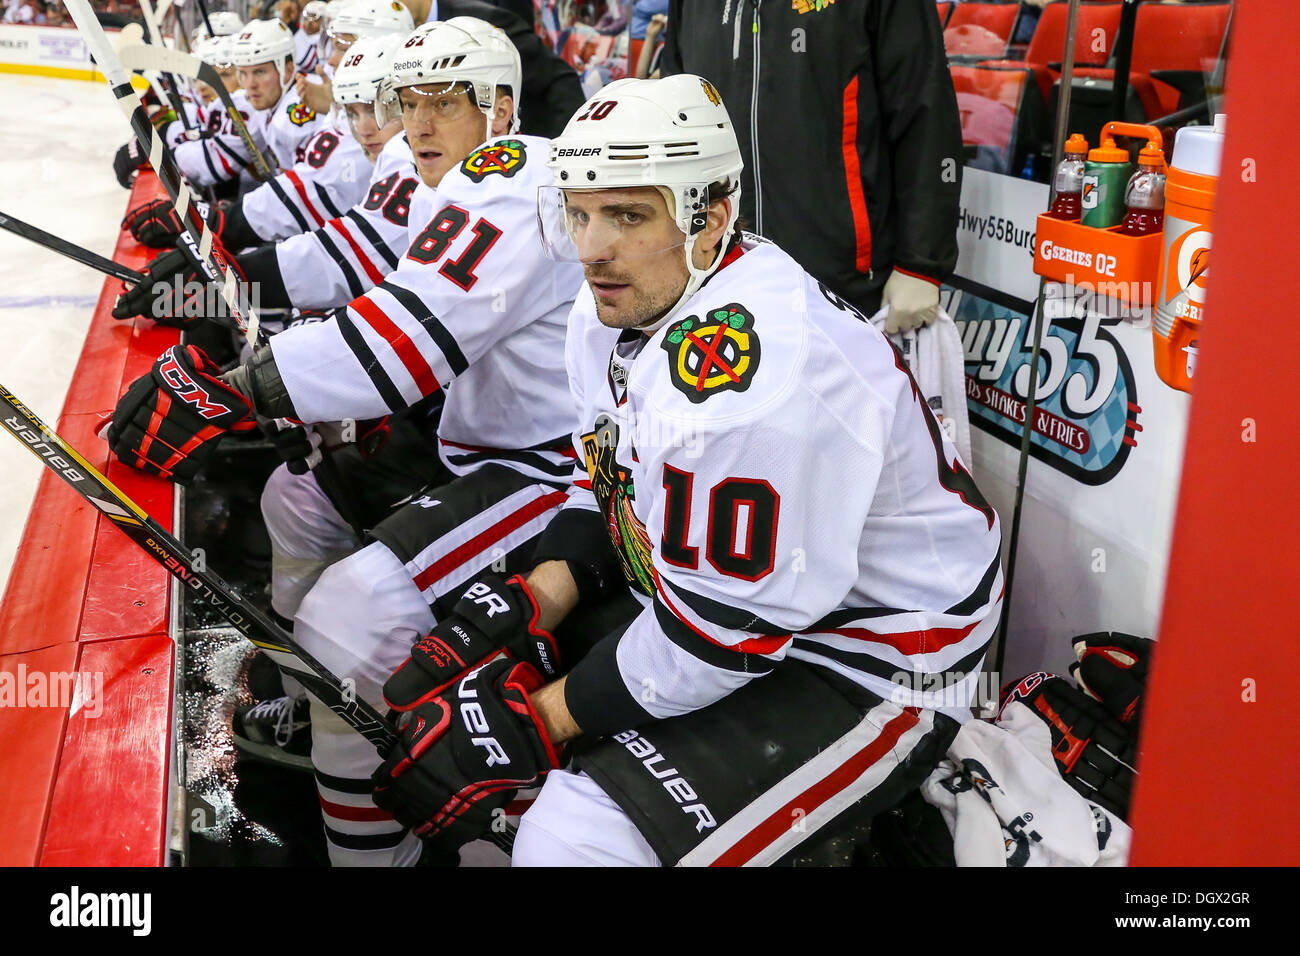 Chicago Blackhawk Patrick Sharp and Marian Hossa during an NHL hockey game during the 2013-2014 season Stock Photo